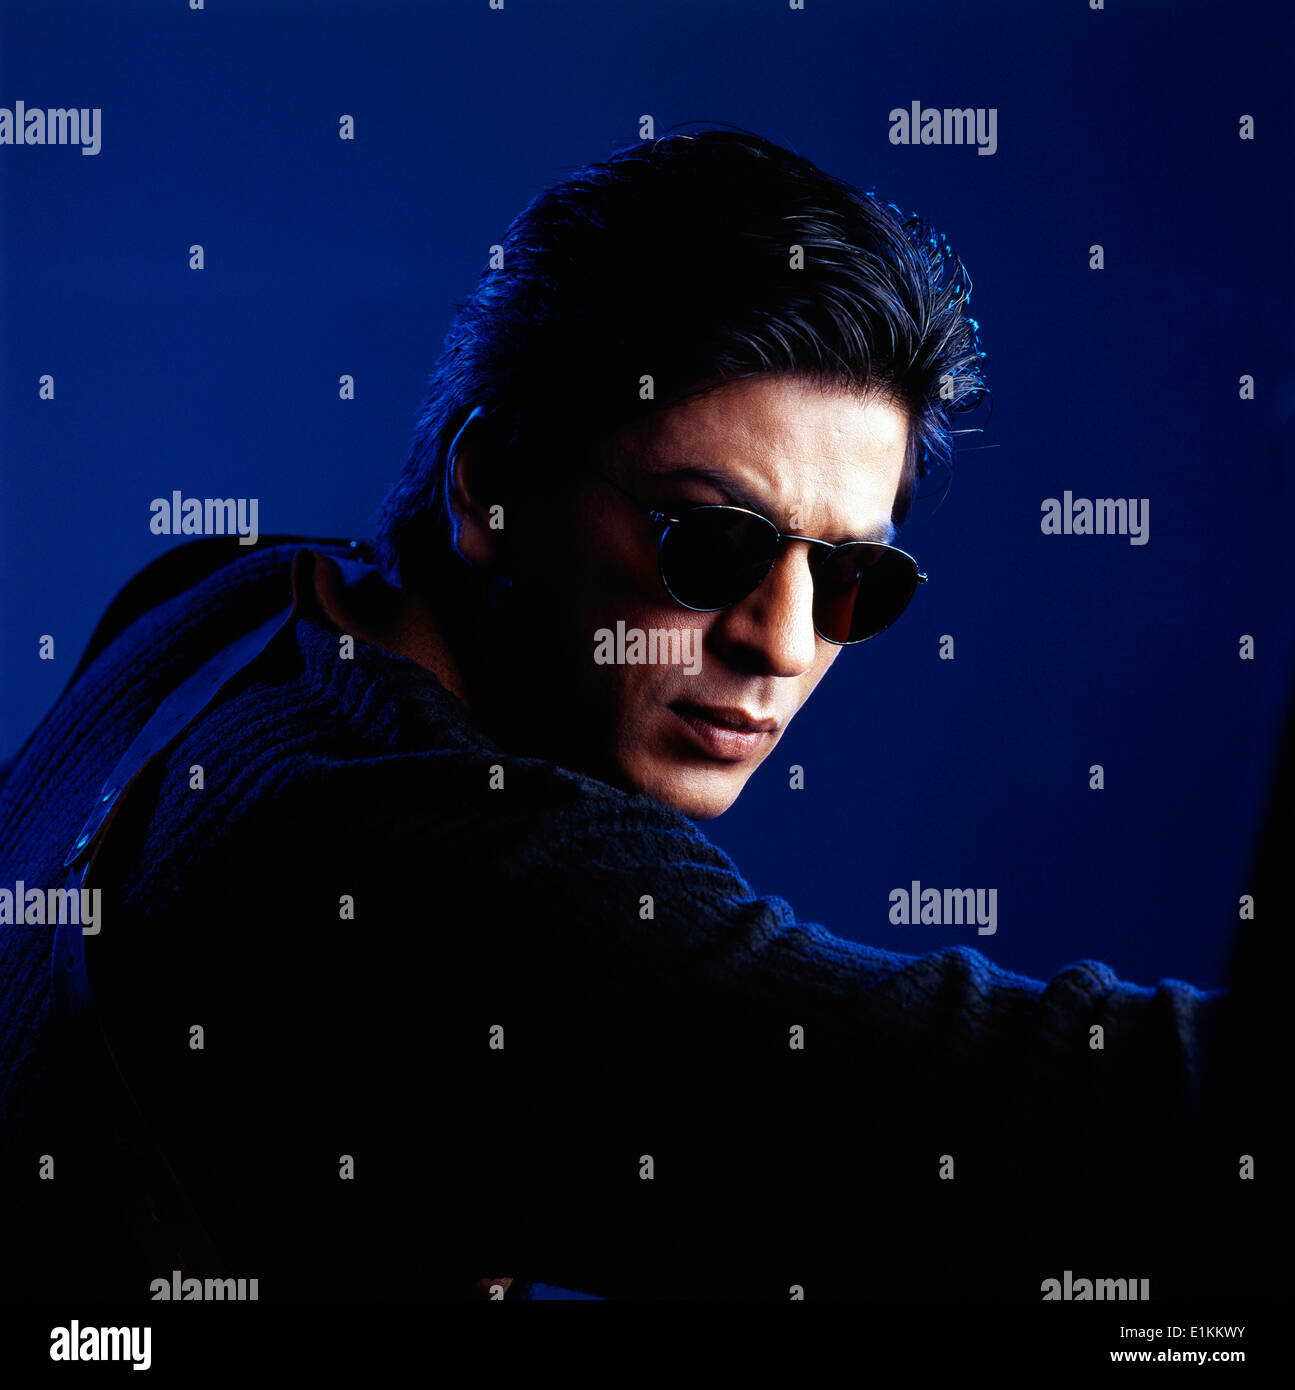 Shahrukh Khan Wearing Sunglasses Indian Bollywood Hindi Movie Film Stock Photo Alamy Many customers and readers asking for its brand name and there were many mix names showing up. https www alamy com shahrukh khan wearing sunglasses indian bollywood hindi movie film image69888839 html